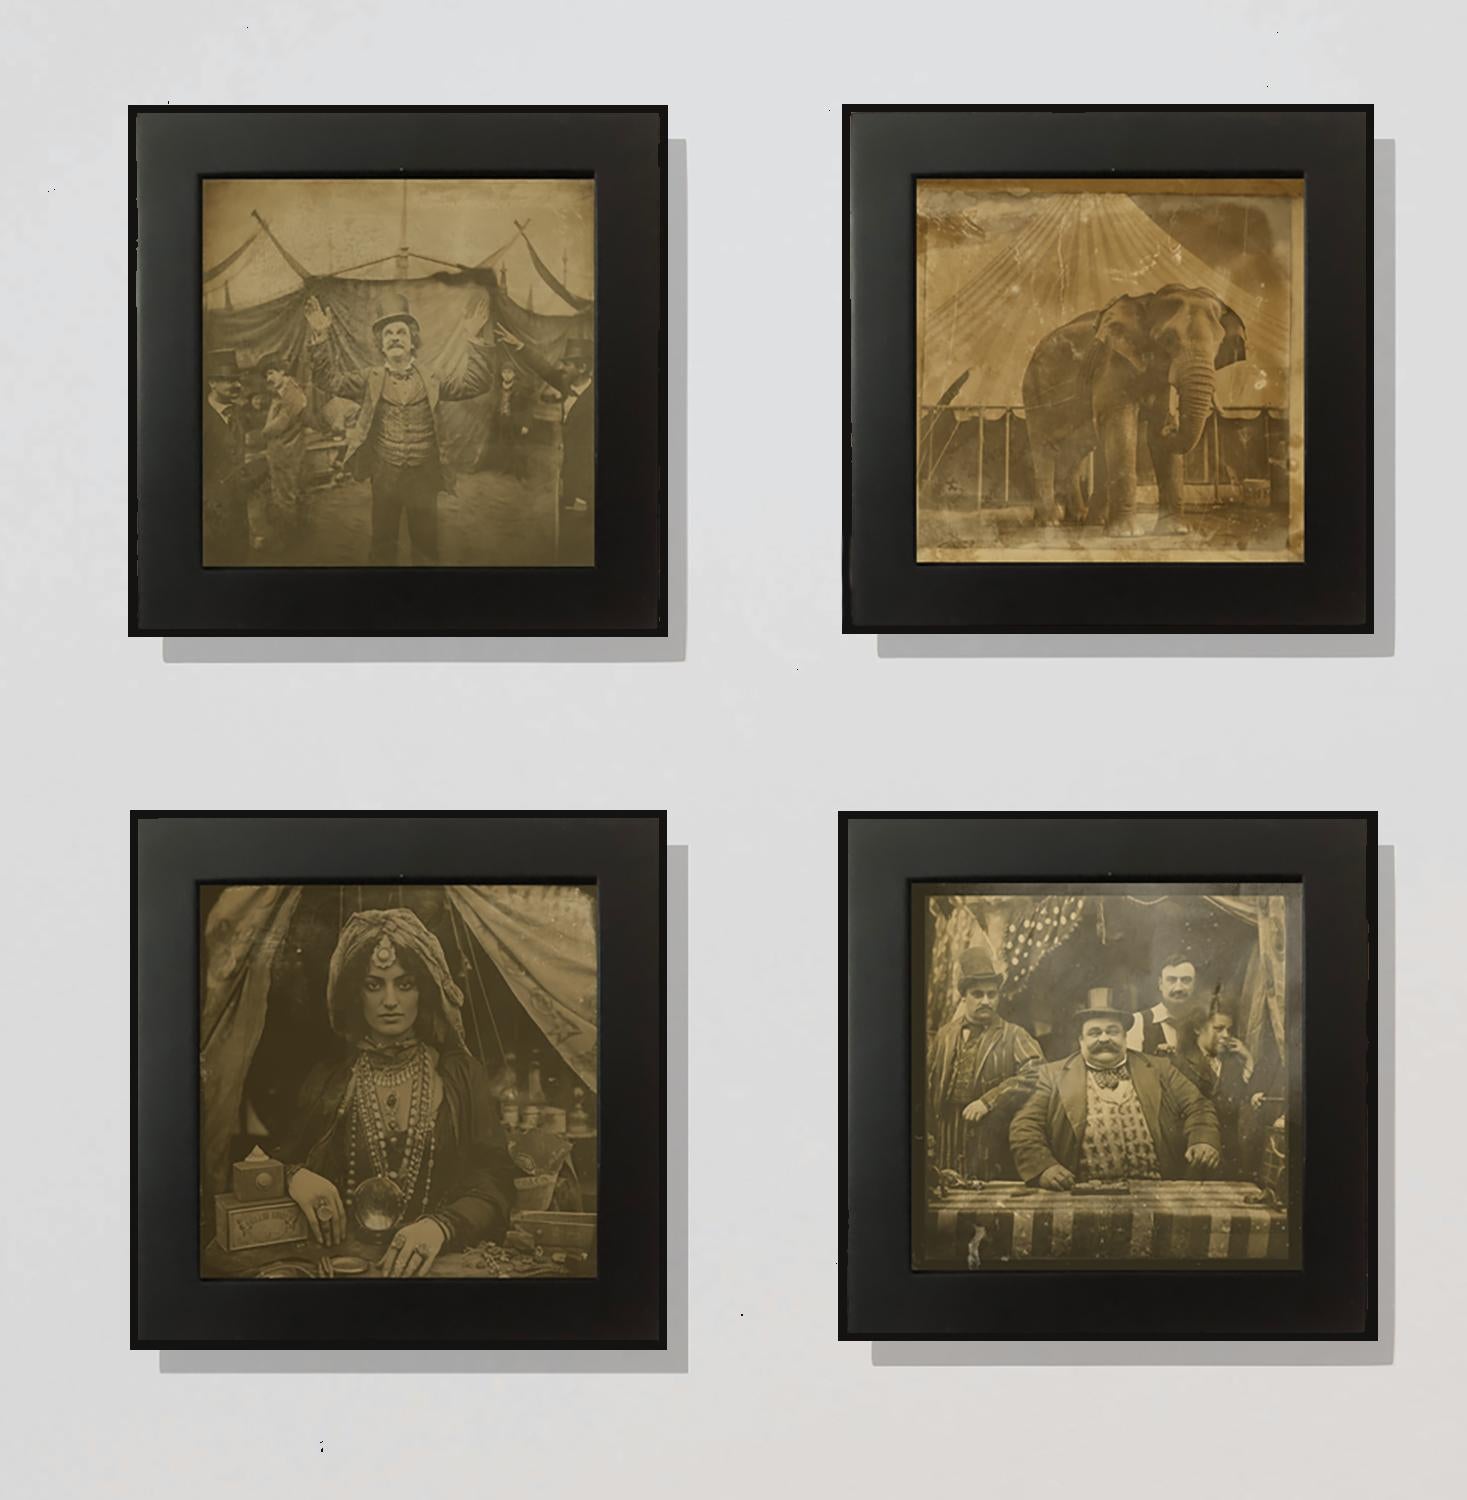 FPA Francis Pavy Artist Figurative Photograph - quartet of circus images  -exotic daguerreotype reproductions Framed